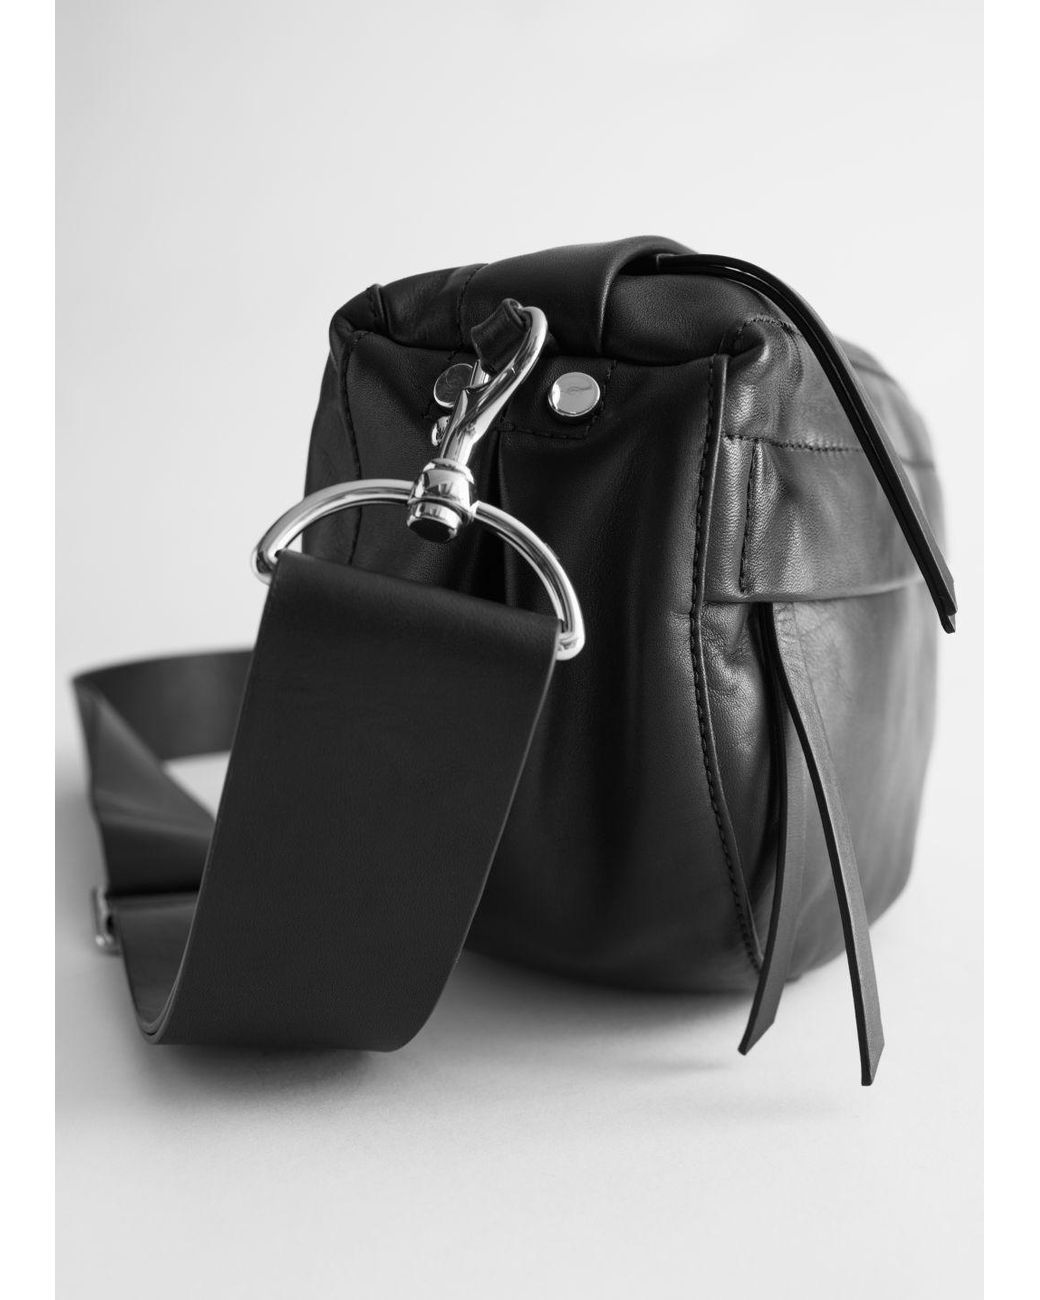 & Other Stories Leather Half Moon Crossbody Bag in Black | Lyst